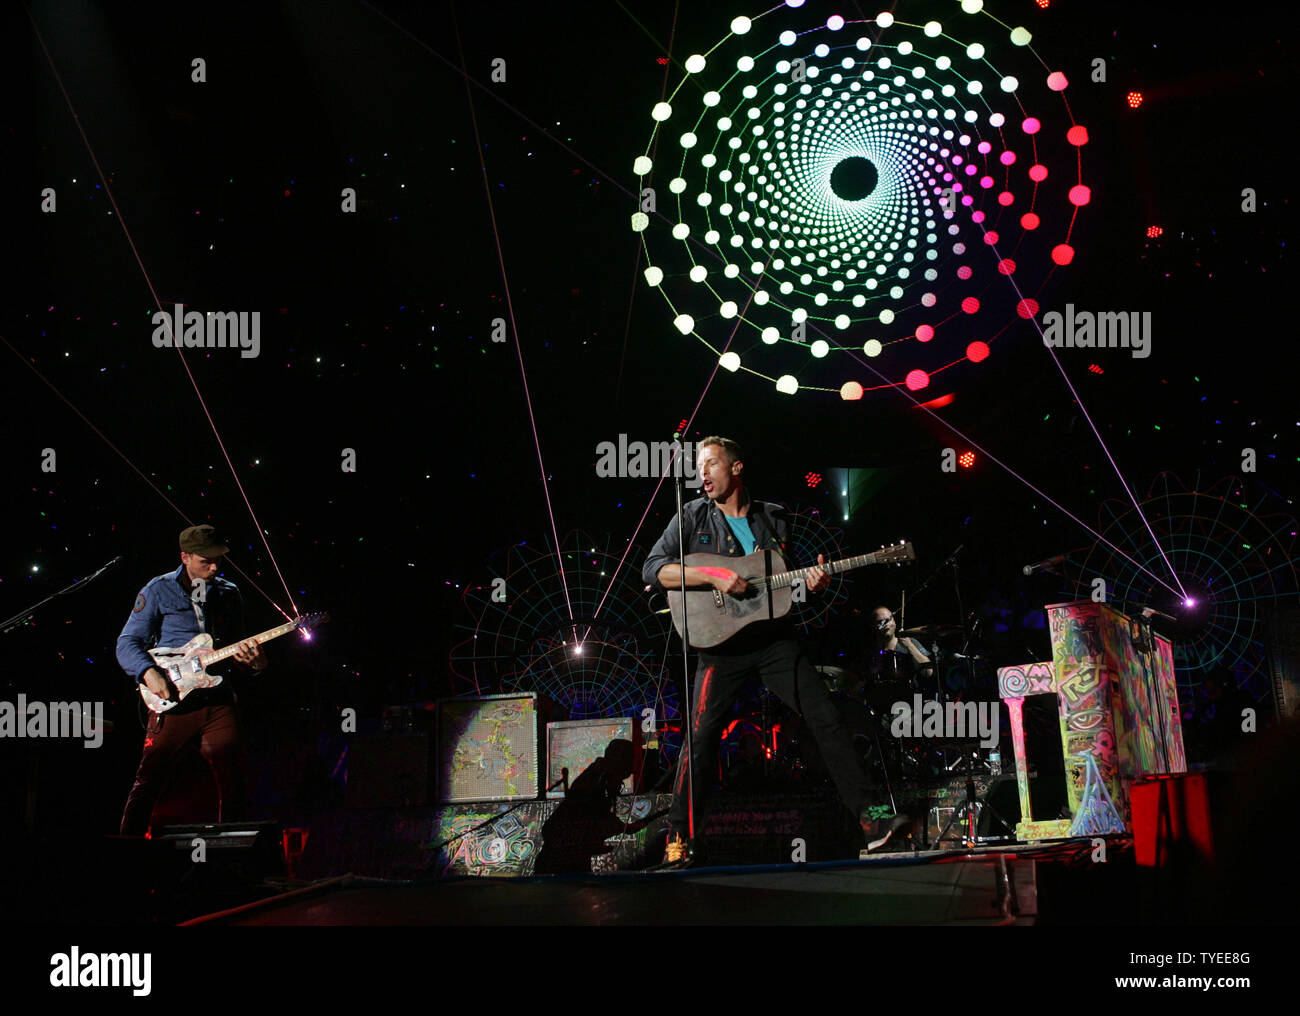 Coldplay performs in concert on their Mylo Xyloto tour 2012 at the American Airlines Arena in Miami on June 29, 2012. UPI/Michael Bush Stock Photo